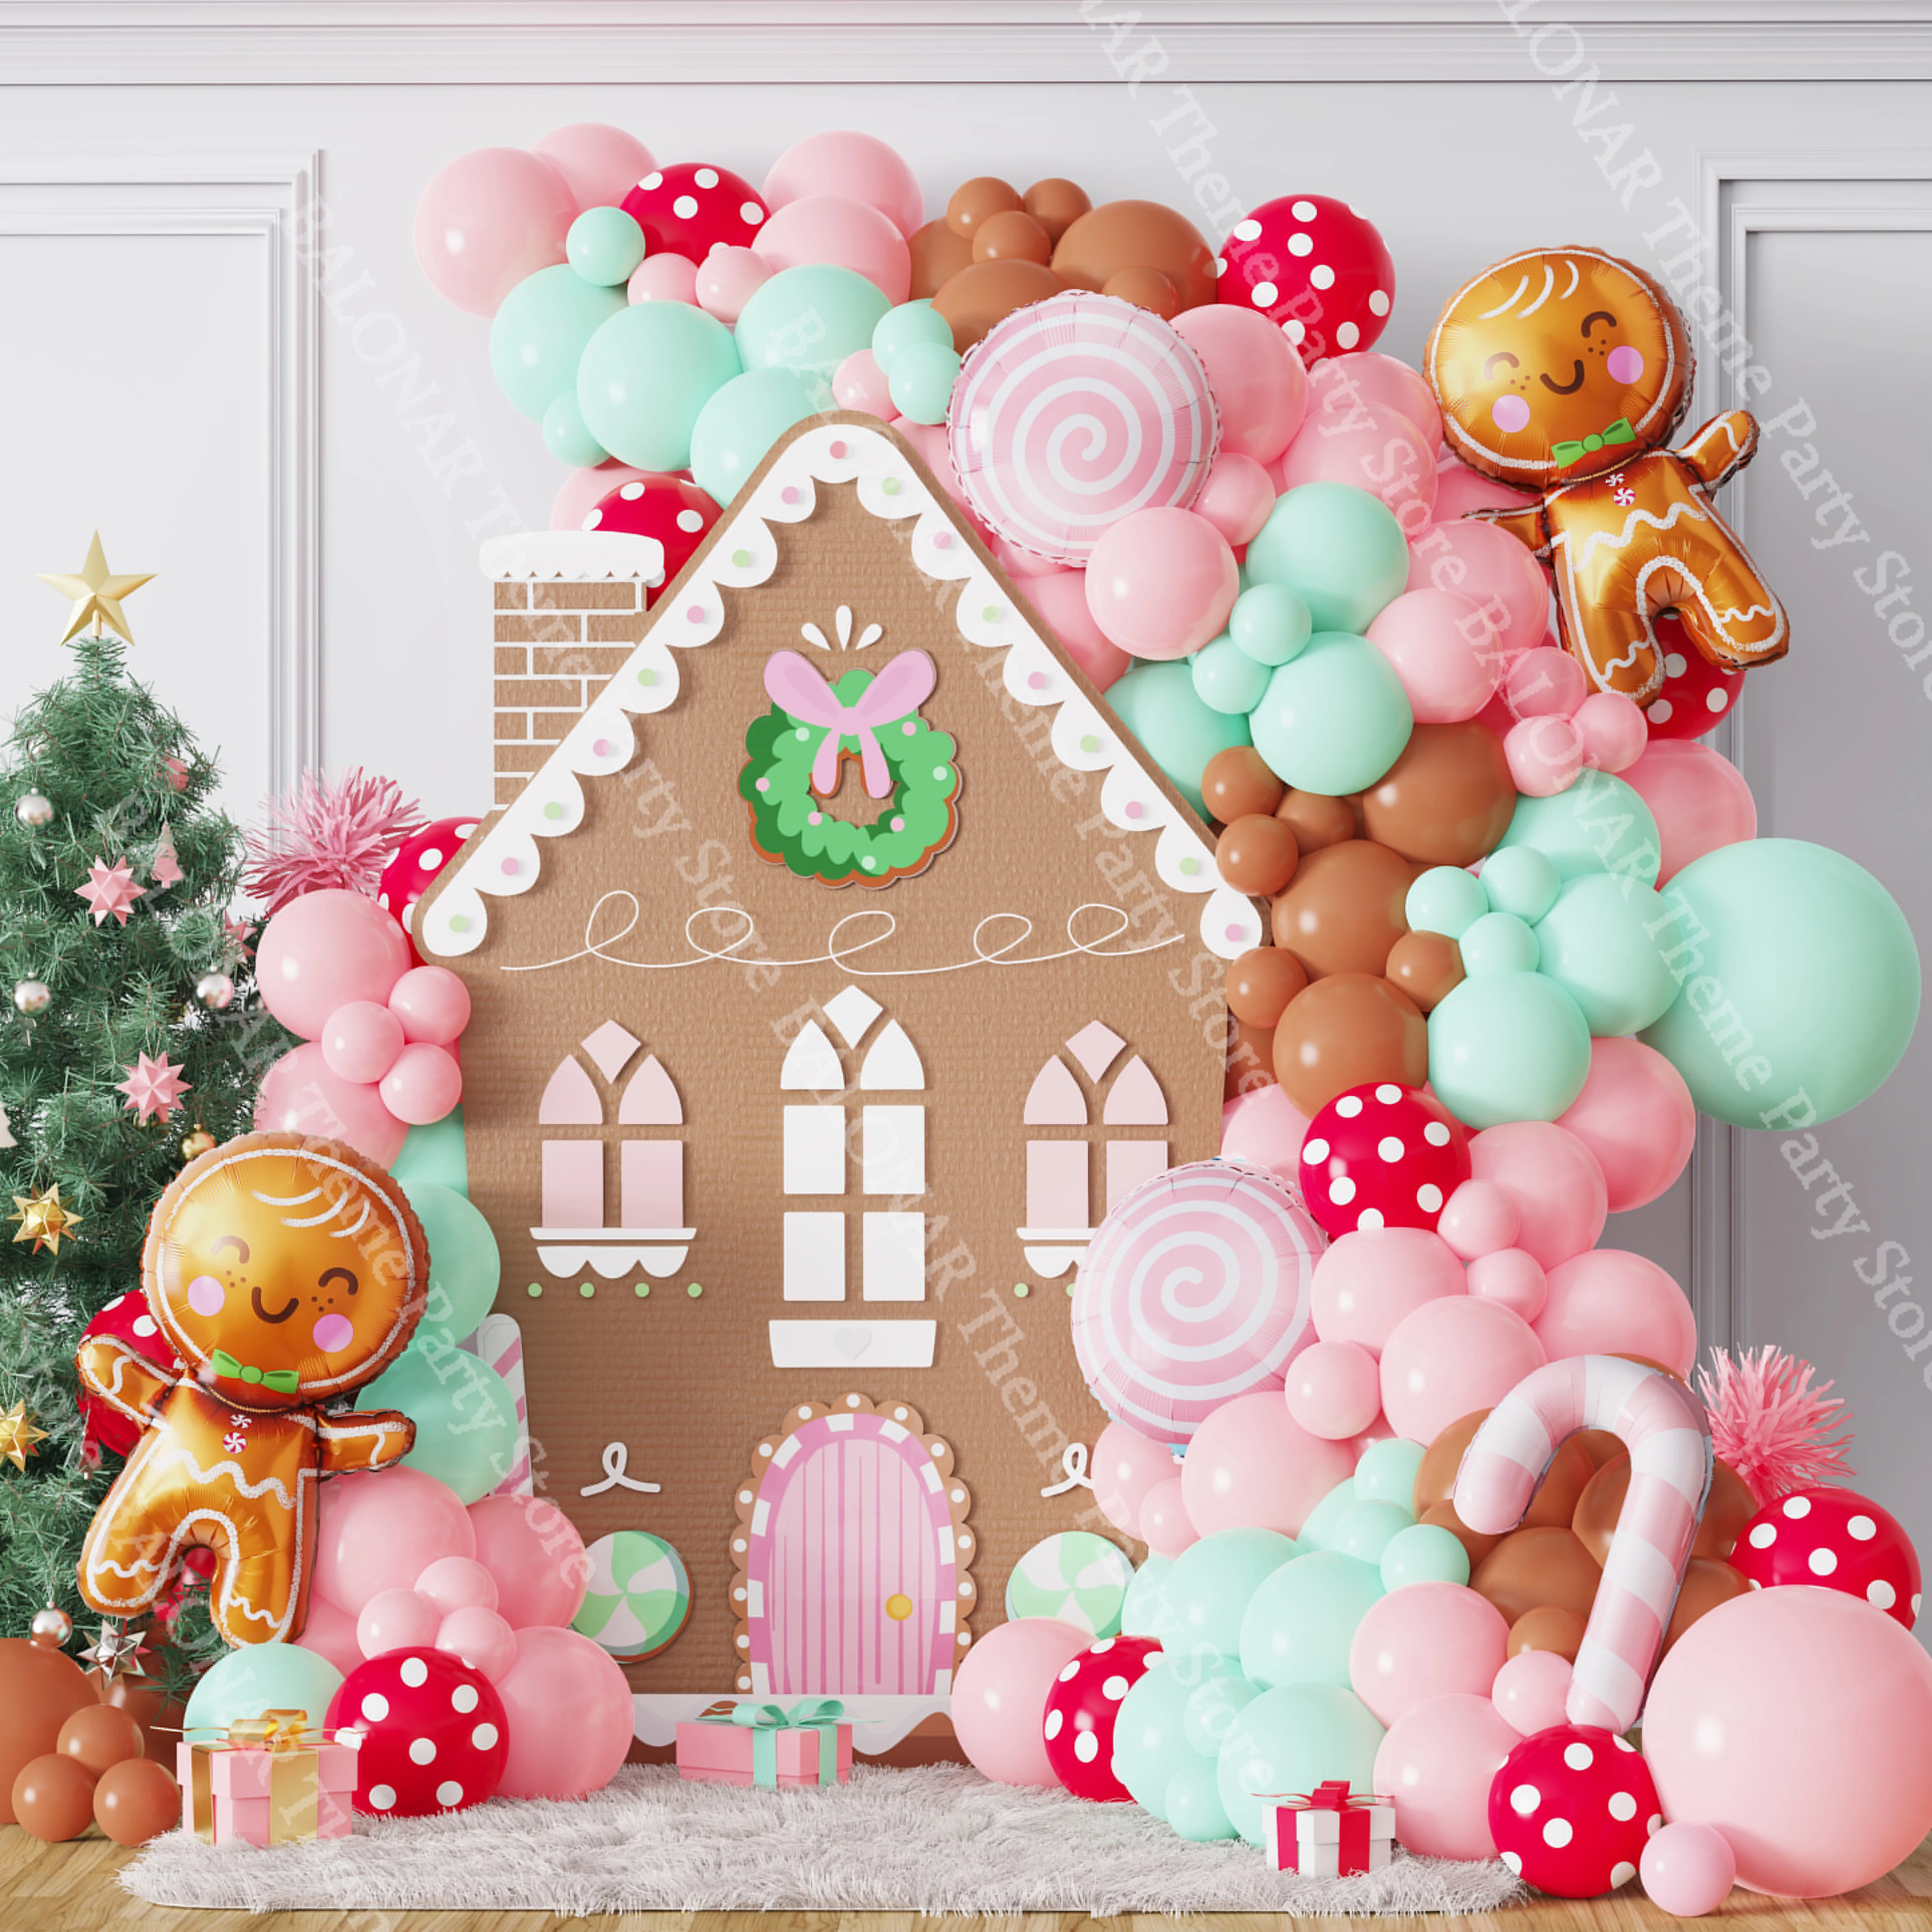 

111pcs Red Pink Windmill Spiral Lollipop Gingerbread Man Cane Candy Balloon Garland New Year Christmas Birthday Party Decoration